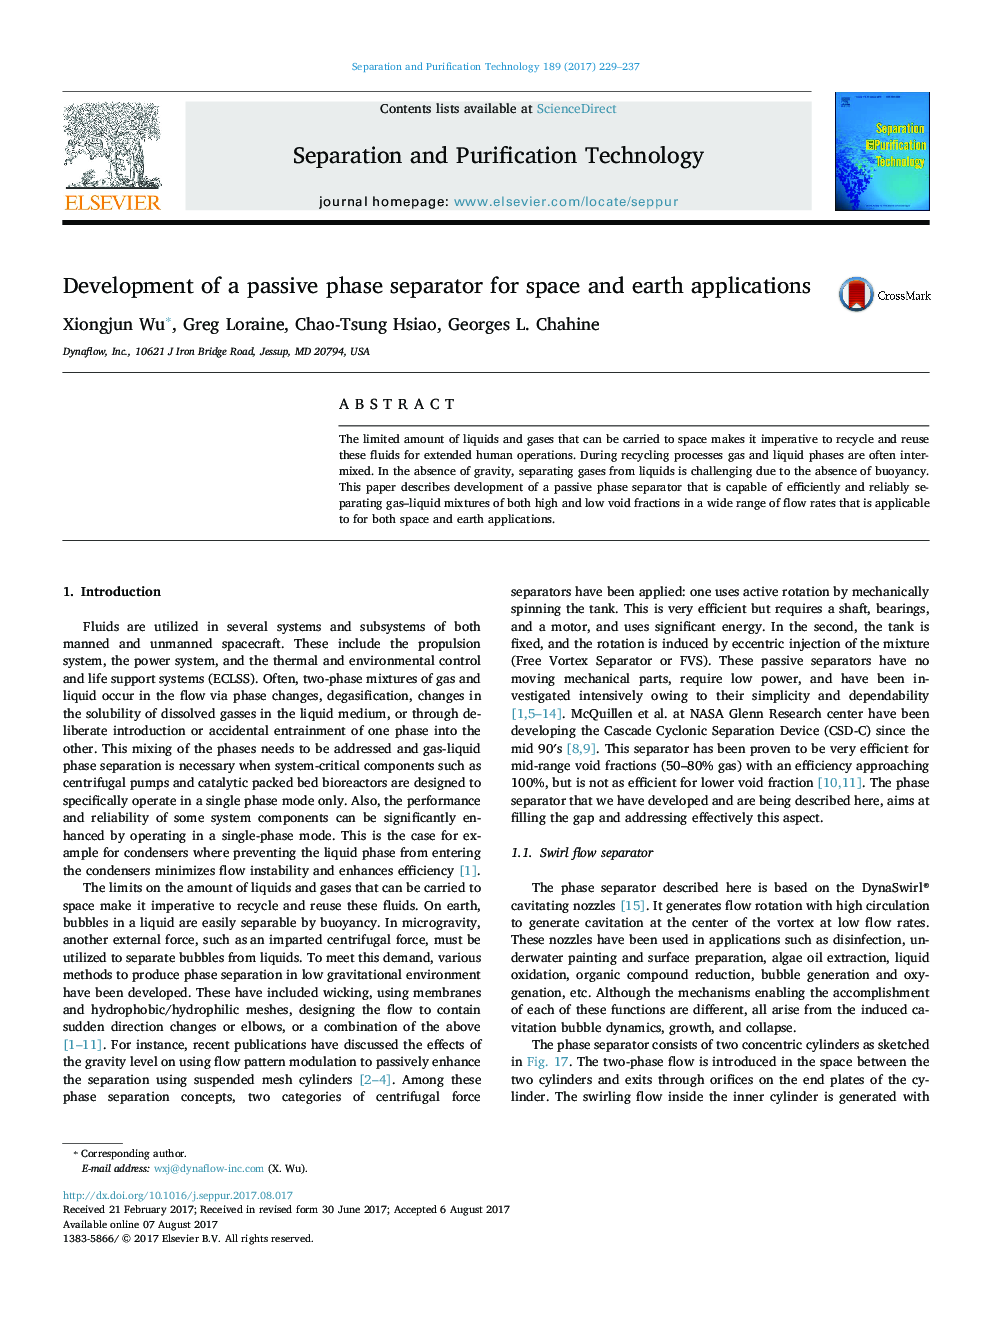 Development of a passive phase separator for space and earth applications